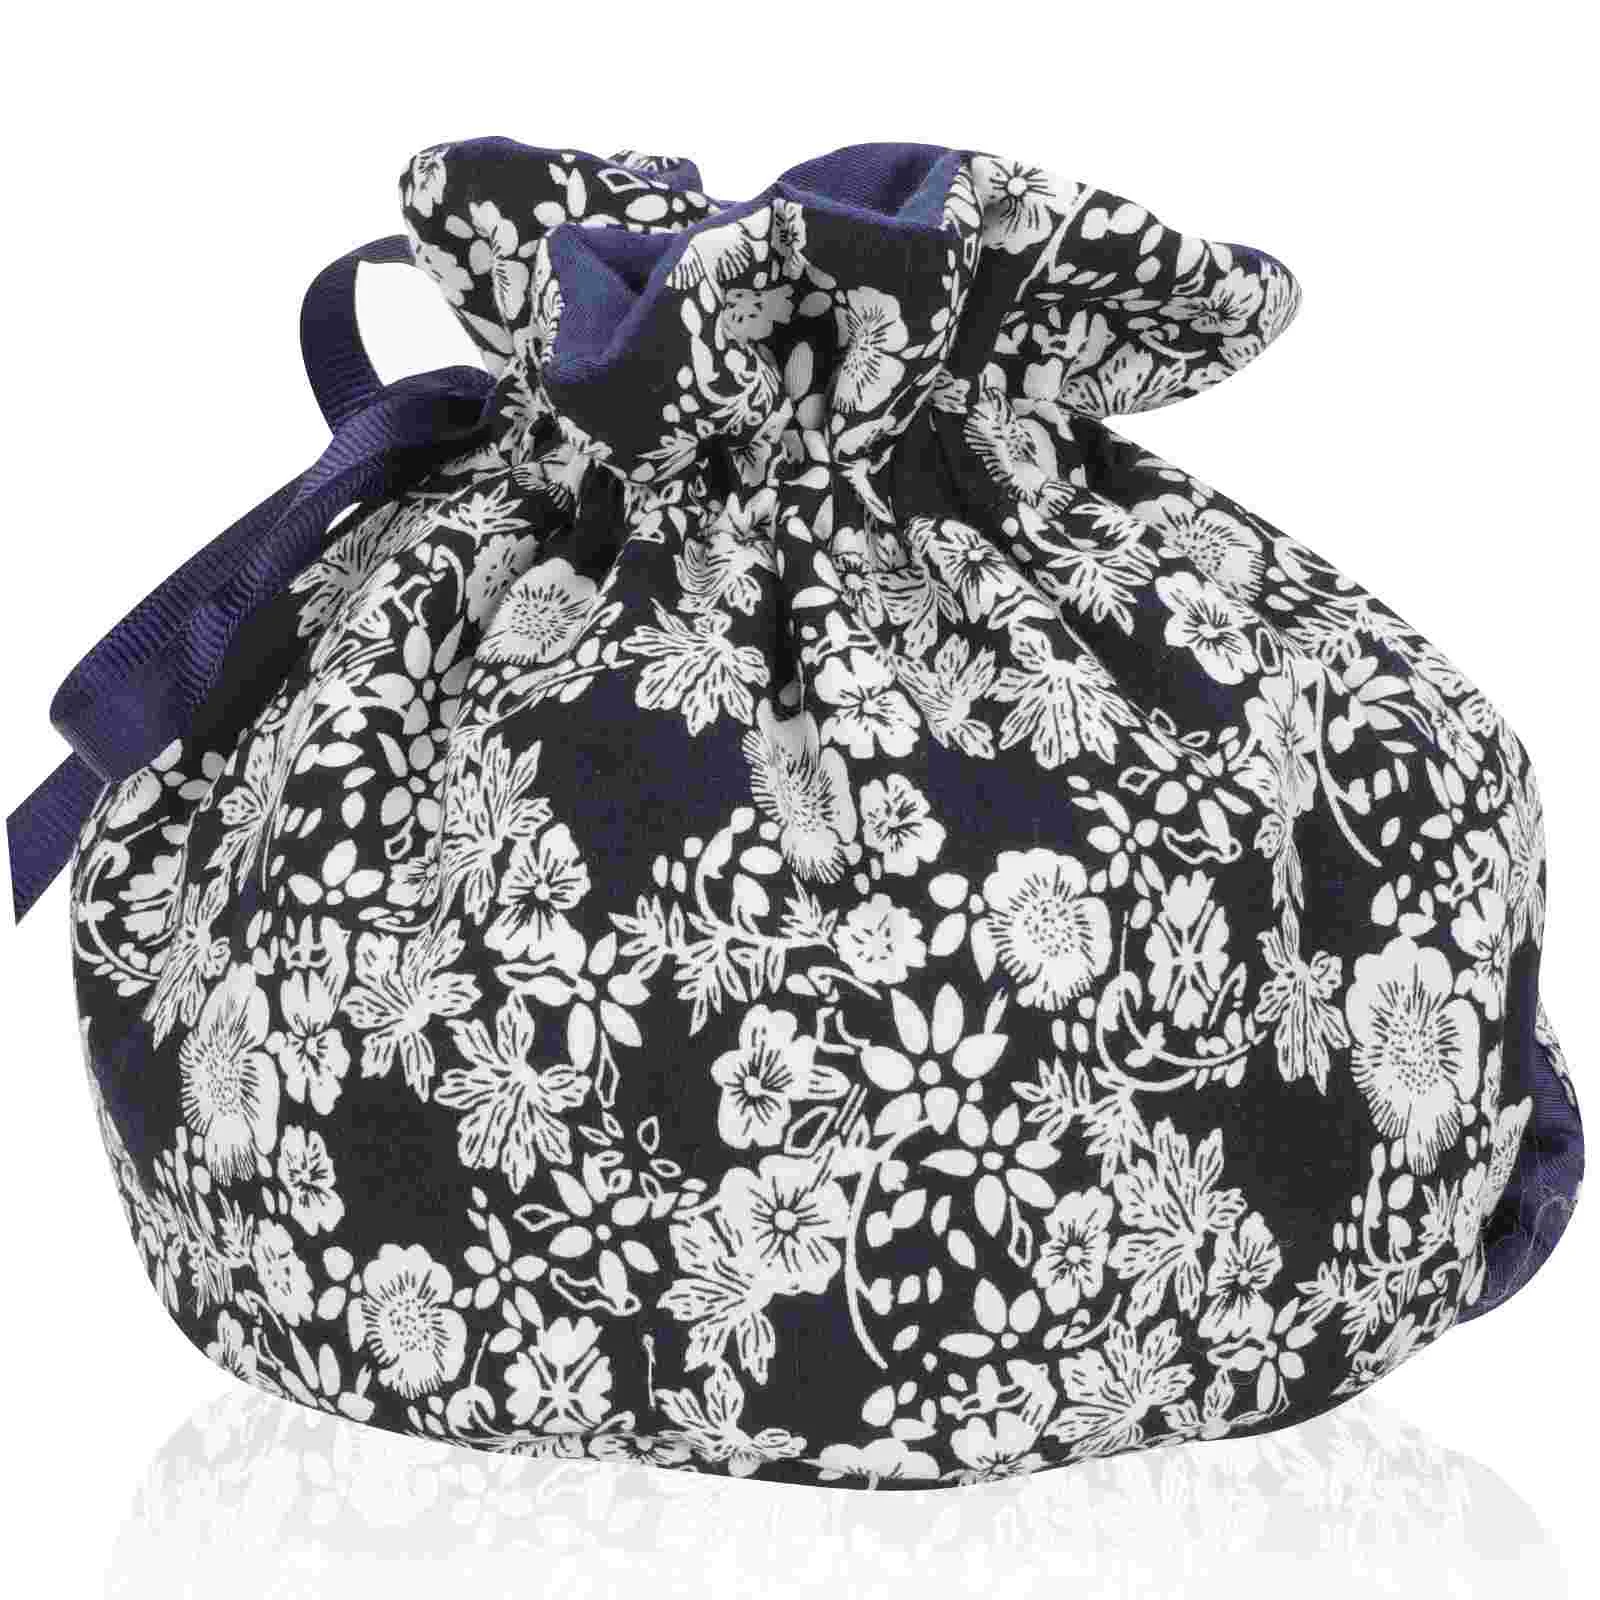 

Tea Cozy Teapot Cover Warmer Pot Kettle Insulatedcoffee Warm Cosy Protector Cotton Floral Drawstring Sleeve Decorative Cozies